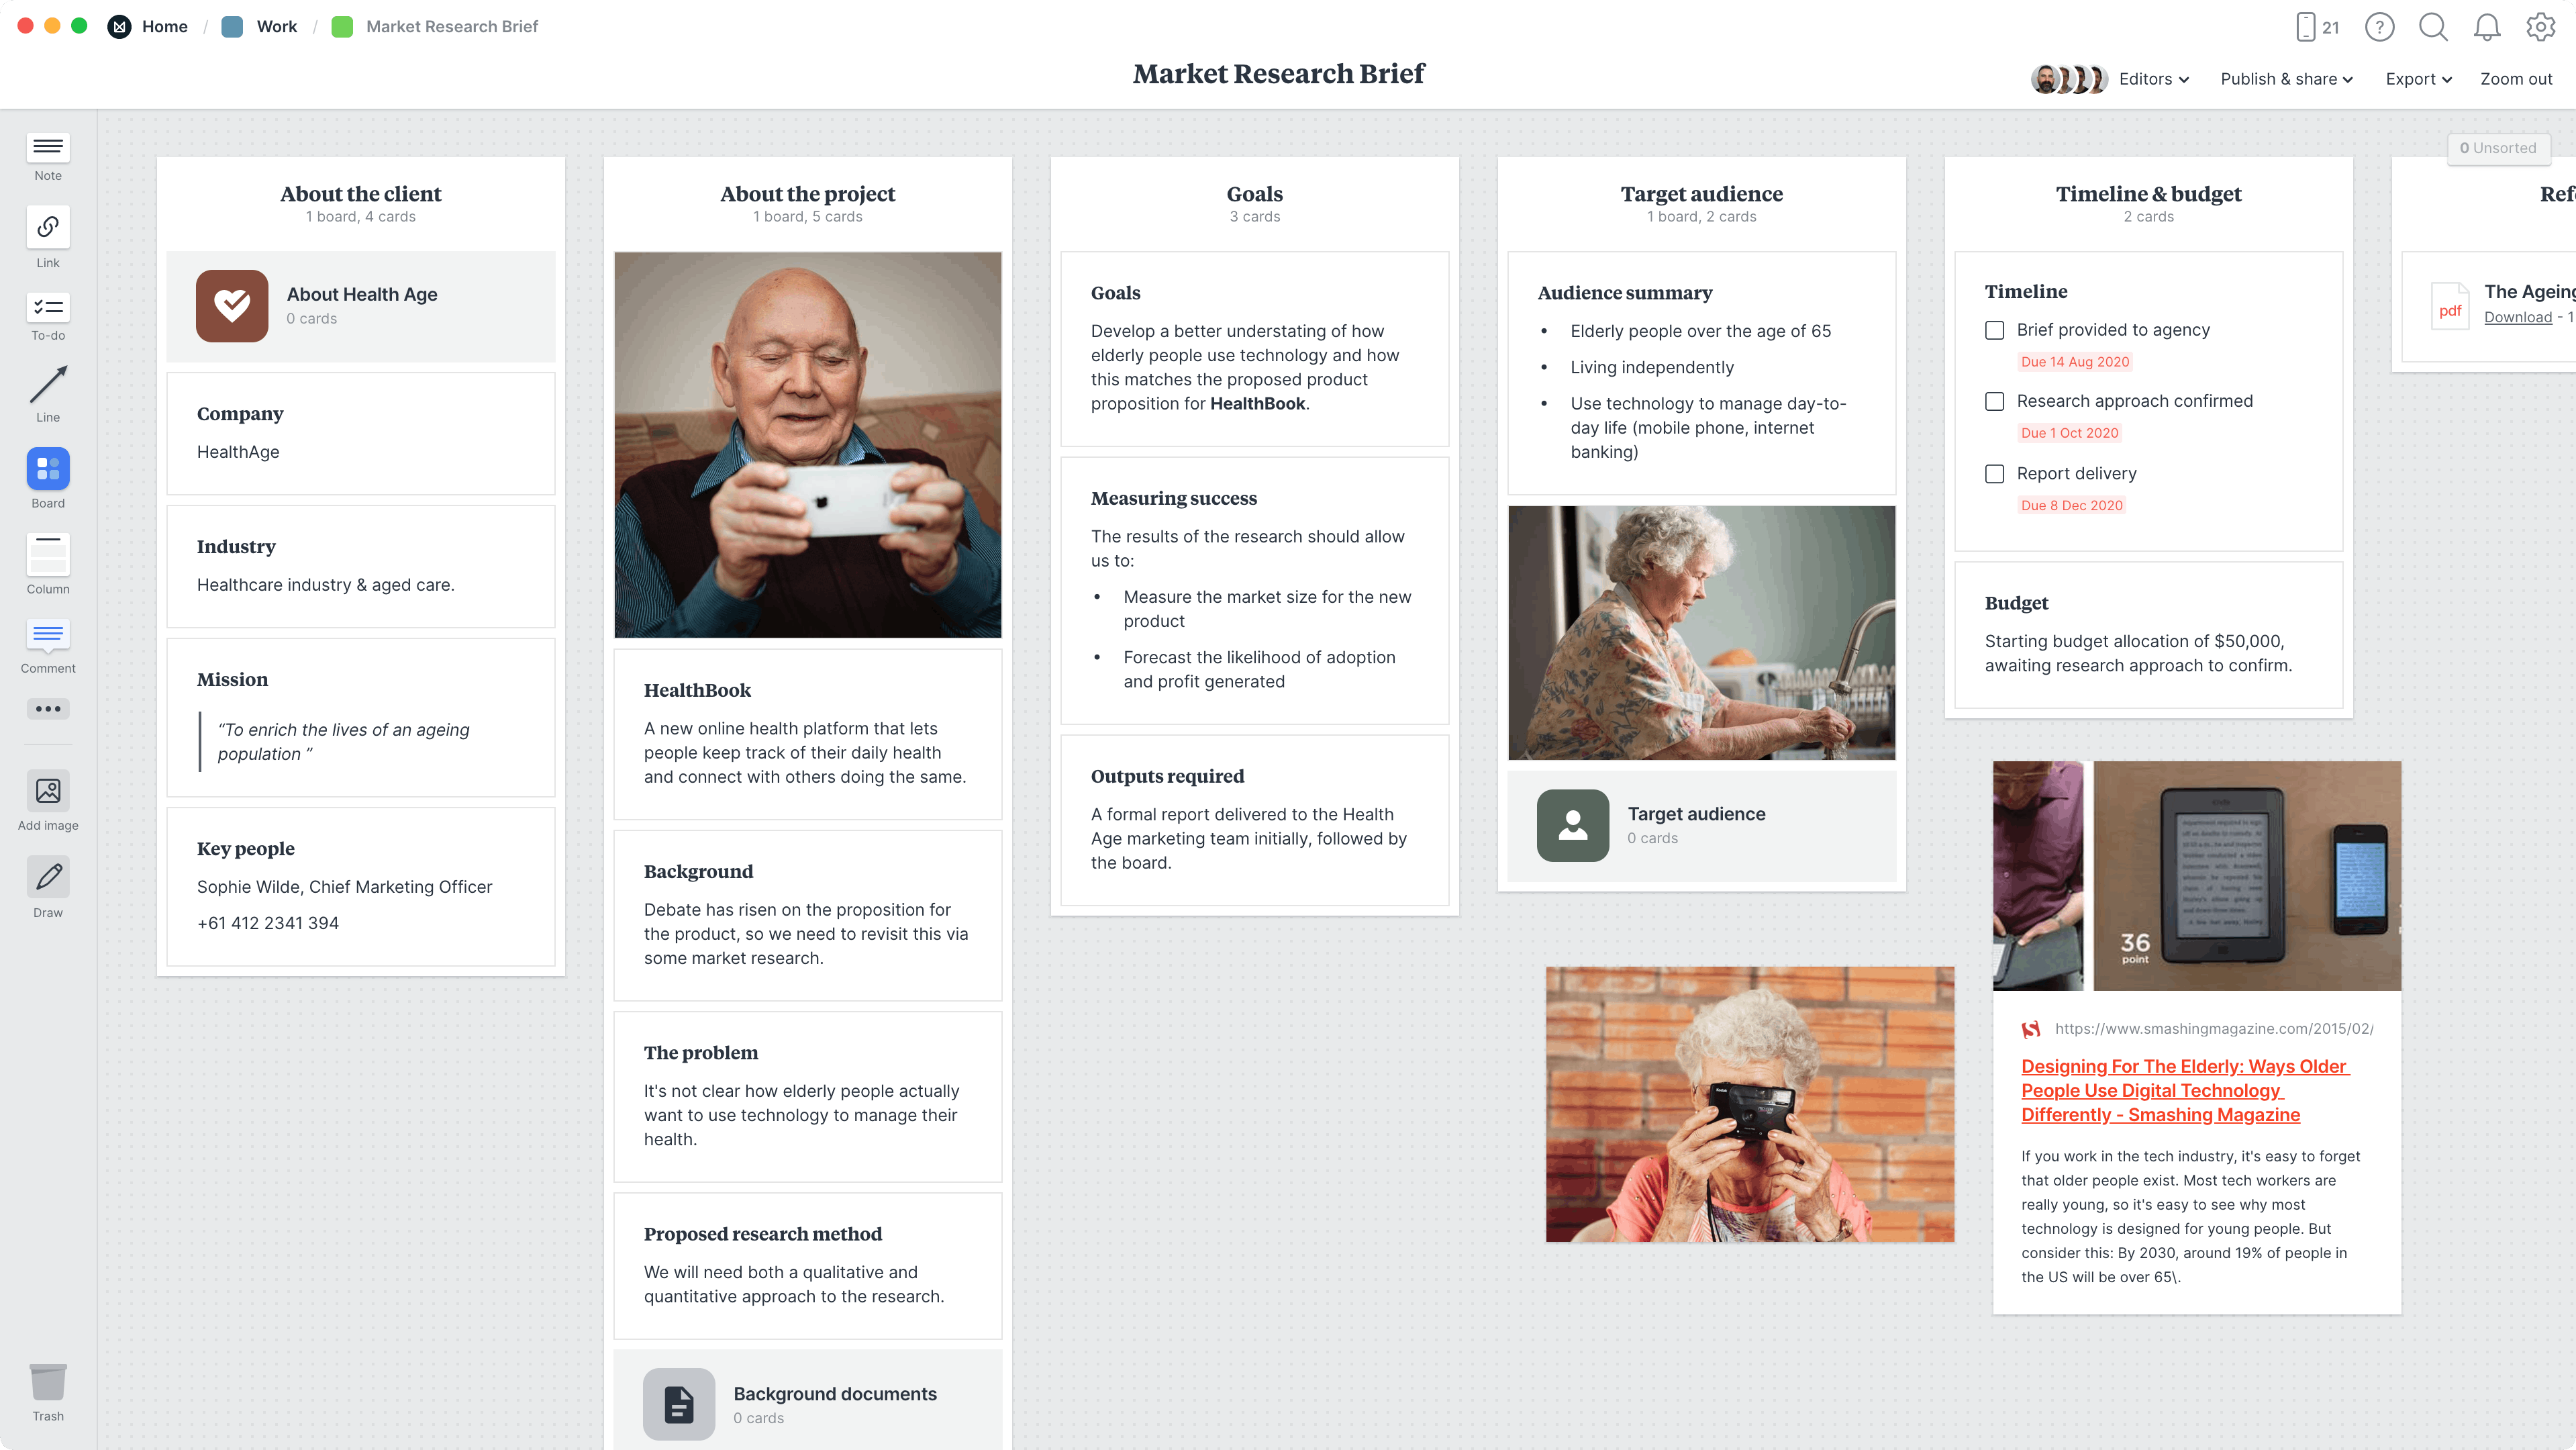 market research brief template